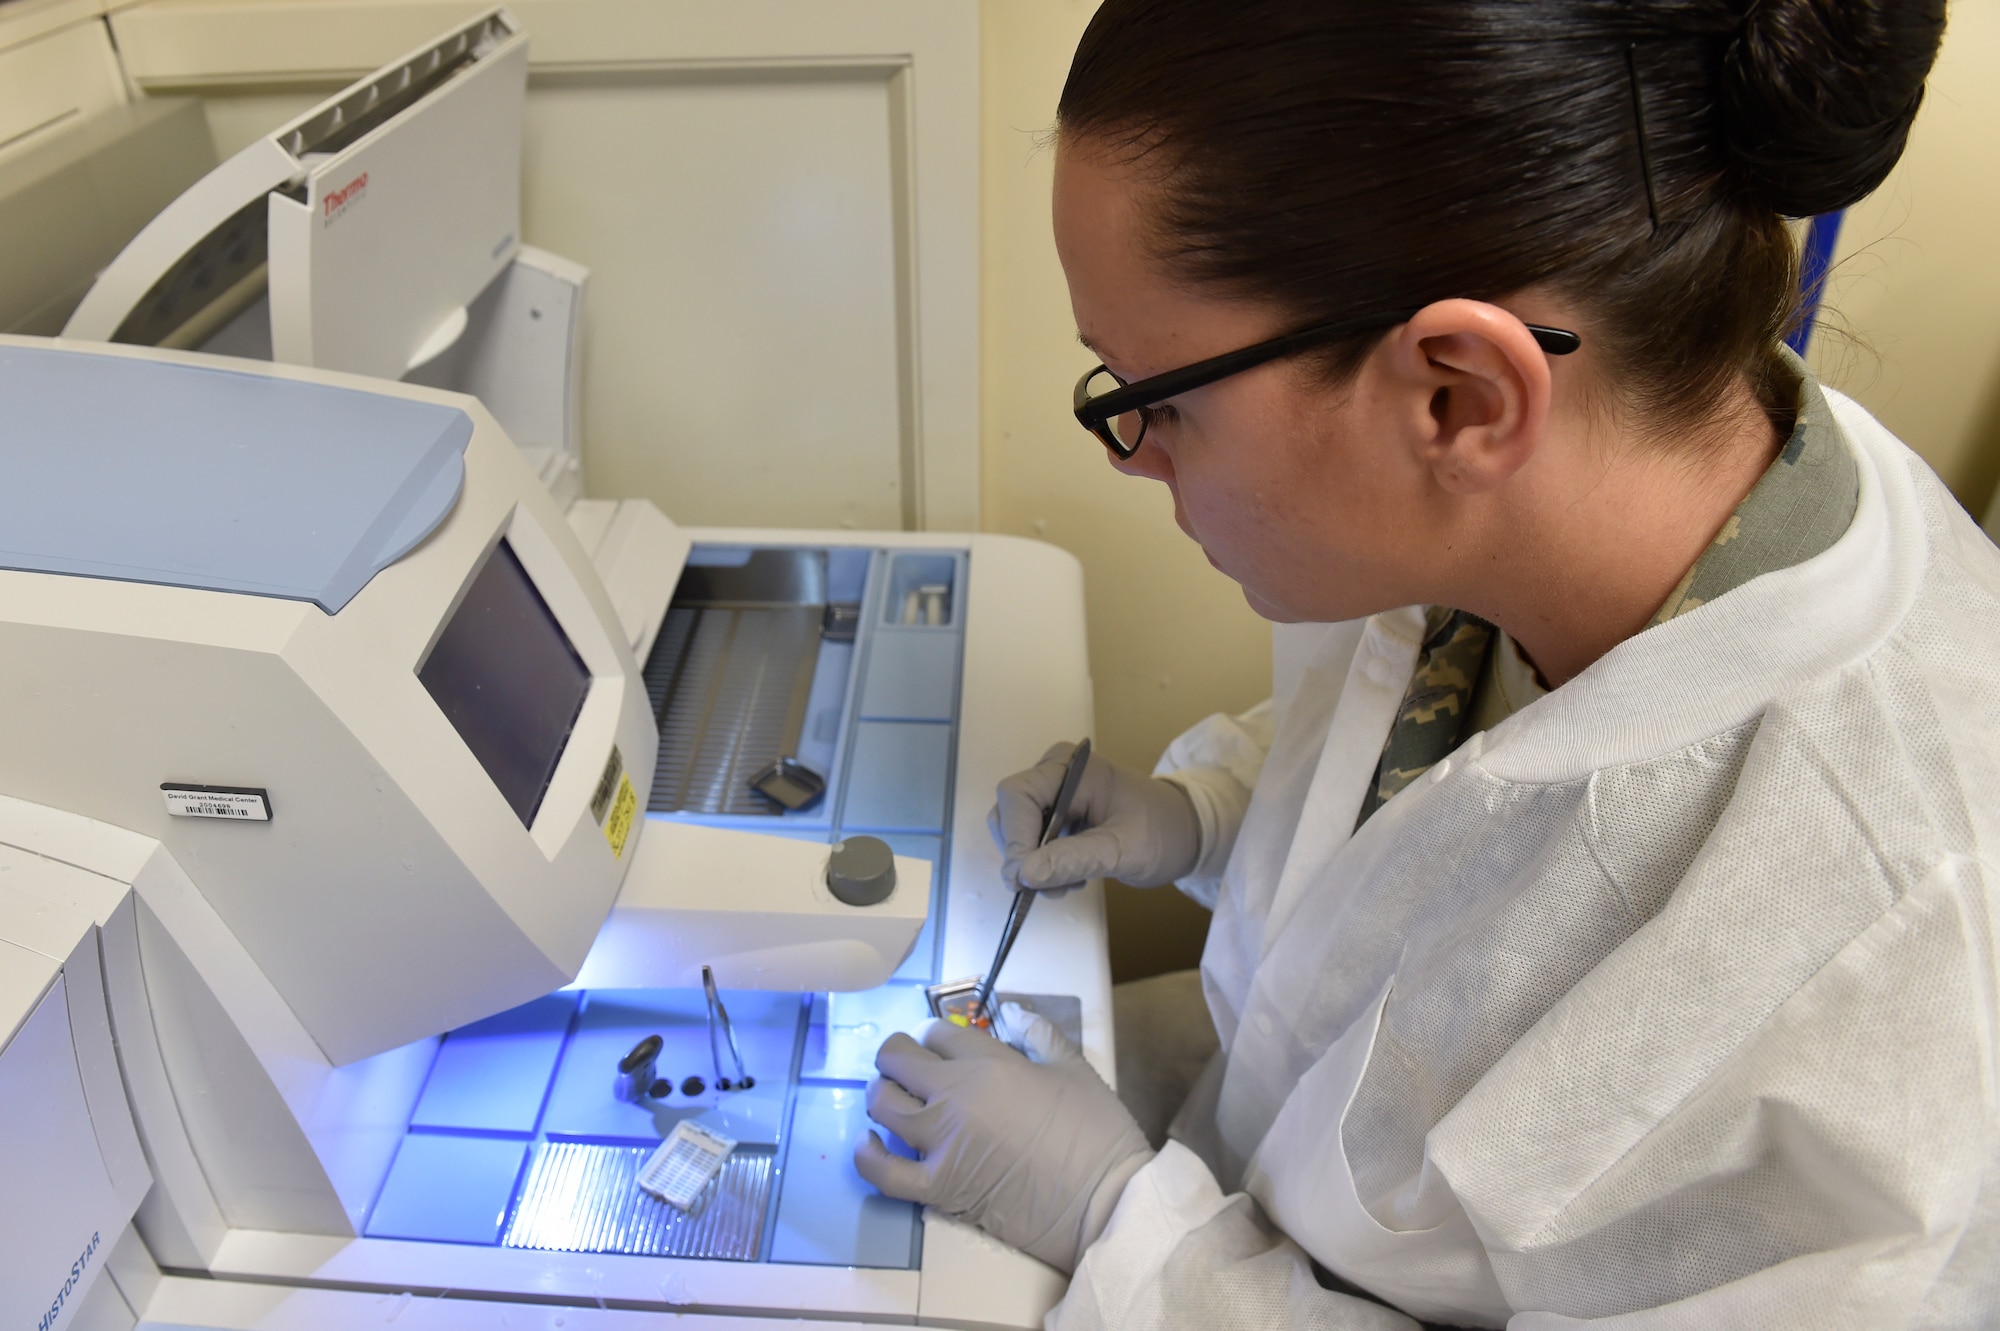 Senior Airman Marisa Grantham, 60th Medical Diagnostics and Therapeutic Squadron histology technician, orients a specimen and places the tissue in a wax-filled mold to prepare it for section cutting, Feb. 15, 2018, Travis Air Force Base, Calif. The tissue is oriented to ensure a good sample before using paraffin wax to stabilize the tissue. (U.S. Air Force photo by Tech. Sgt. Liliana Moreno/Released)